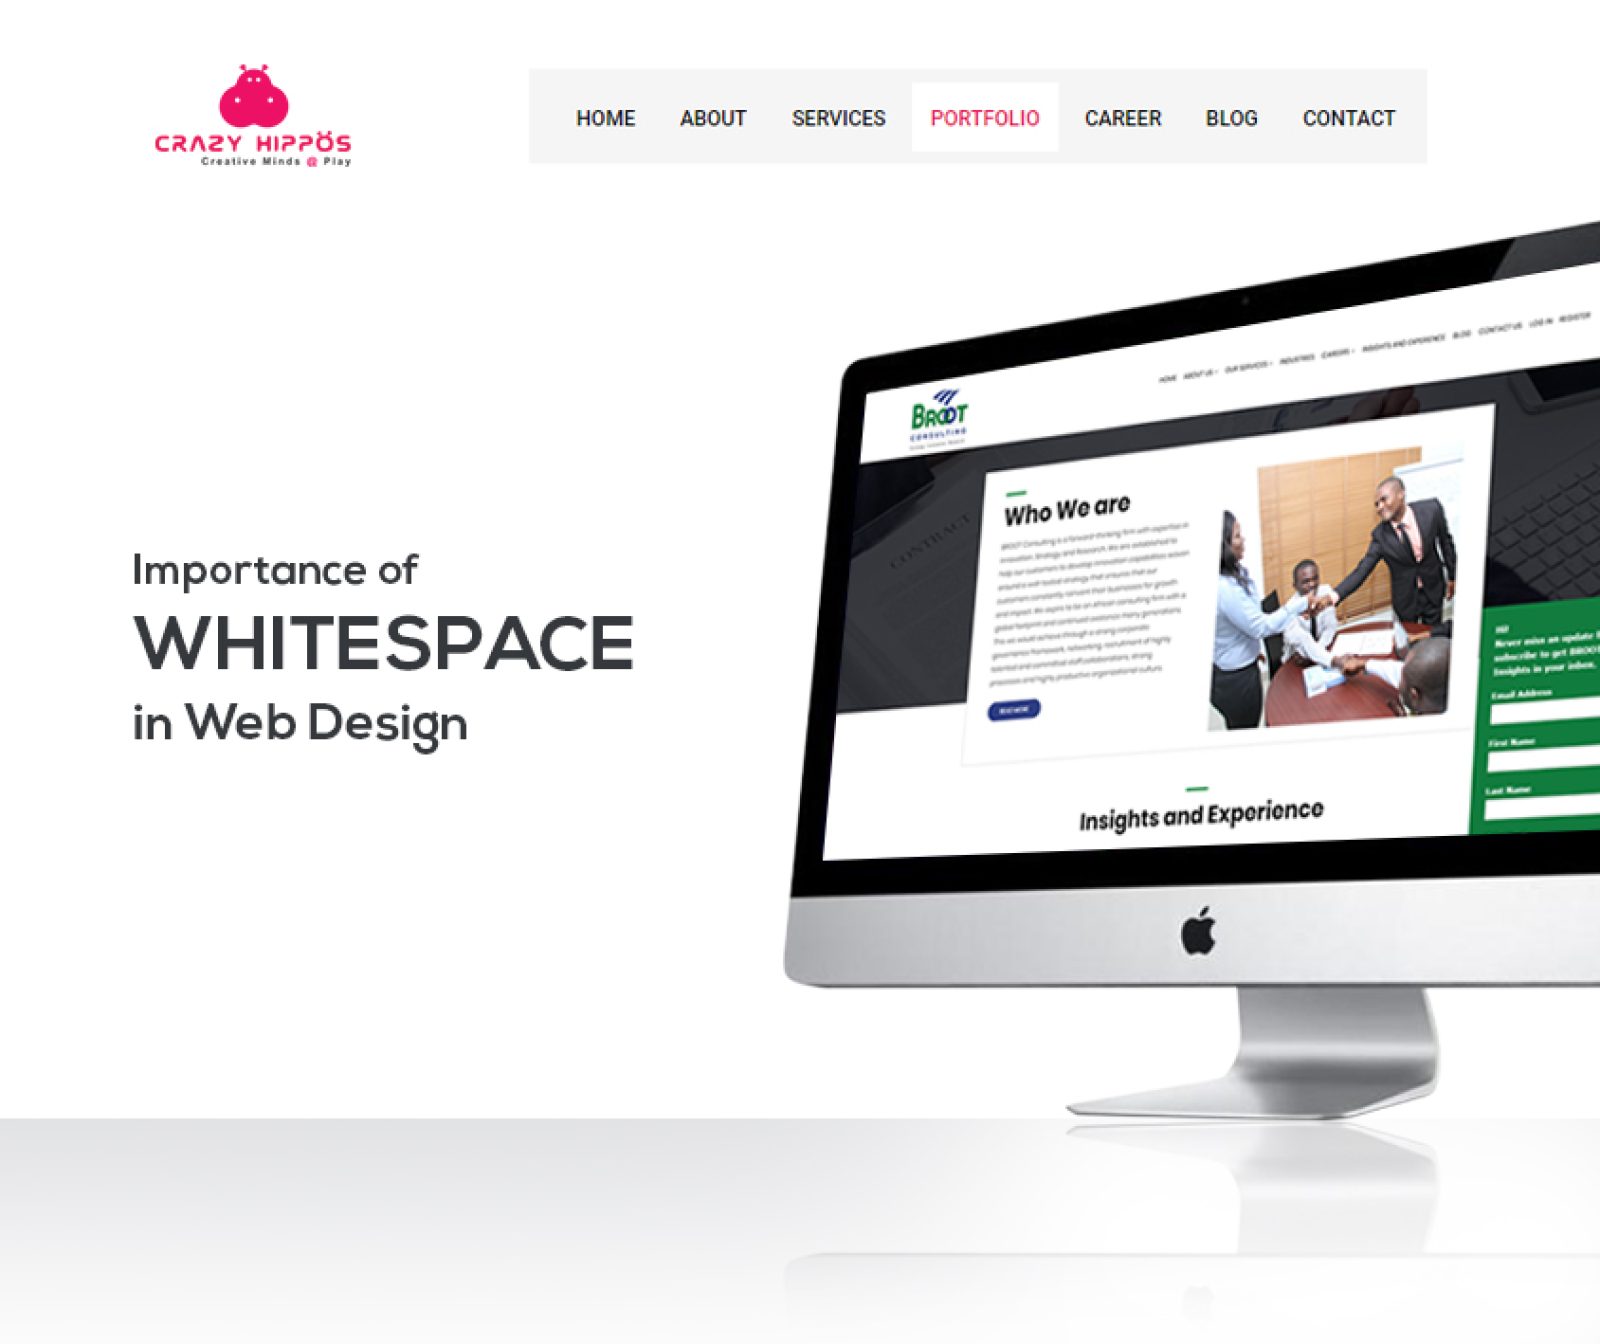 THE POWER OF WHITESPACE